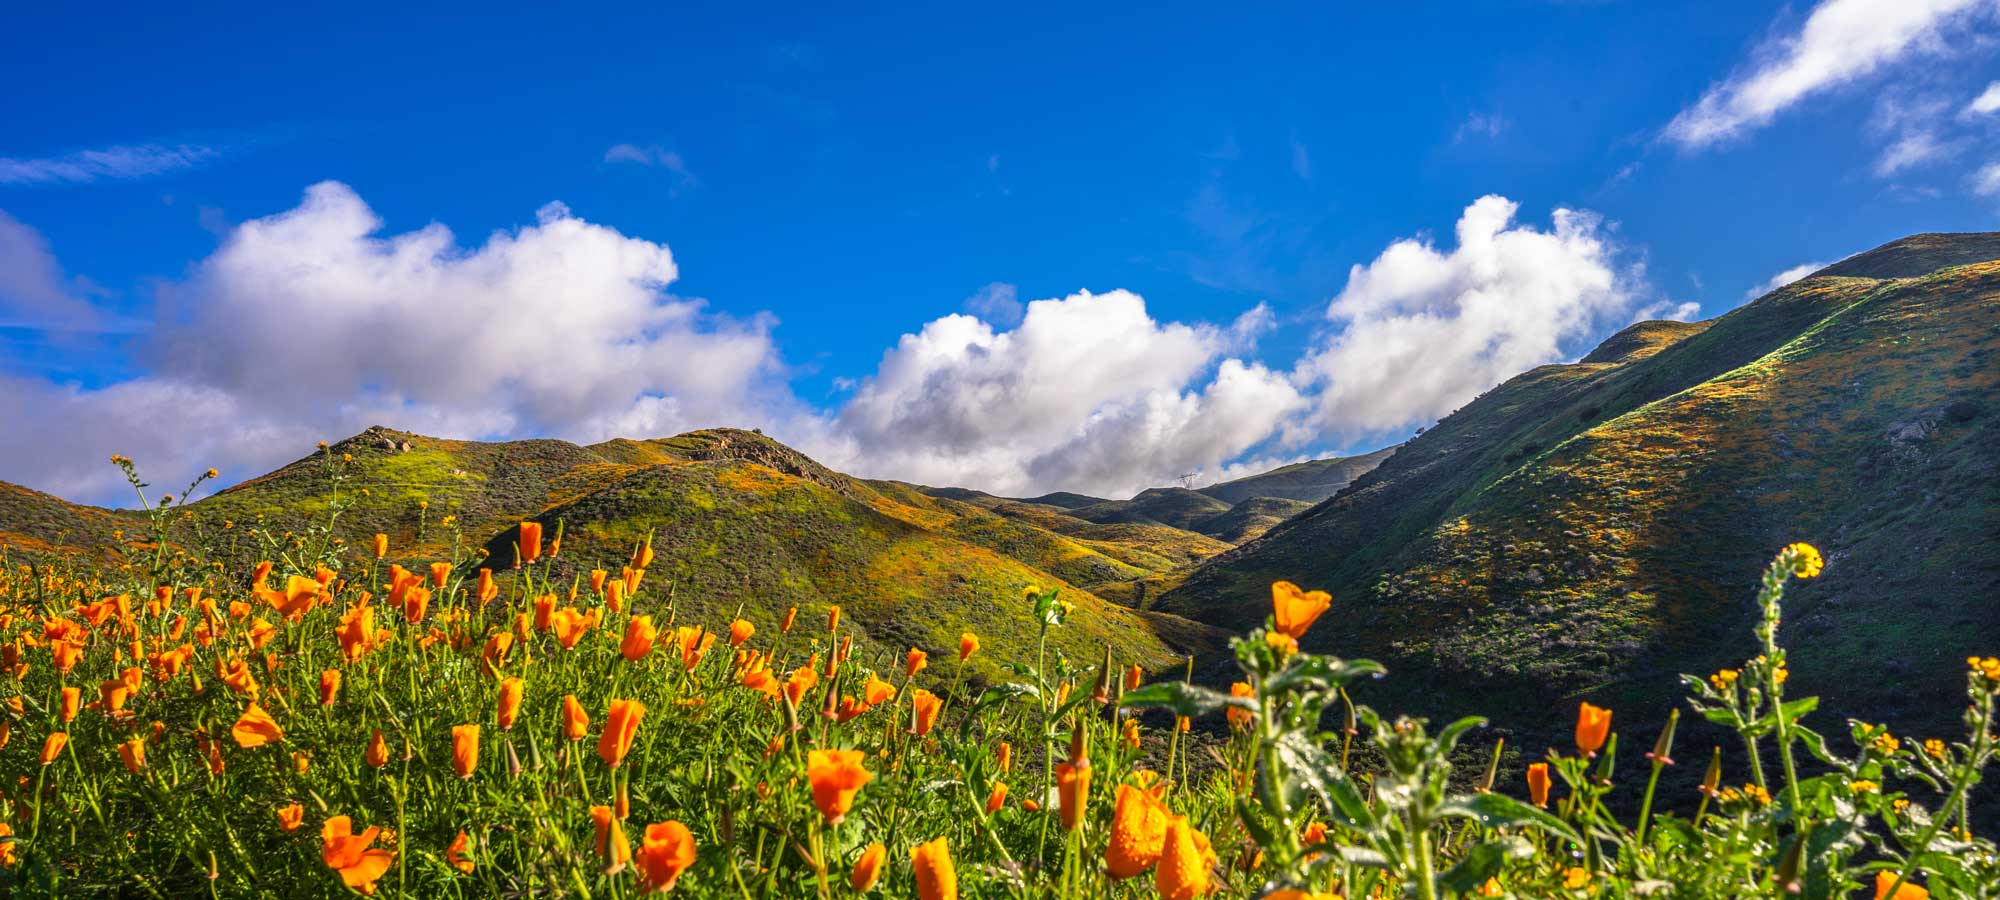 photo - Blooming Poppies with Hills in Background at Lake Elsinor, California